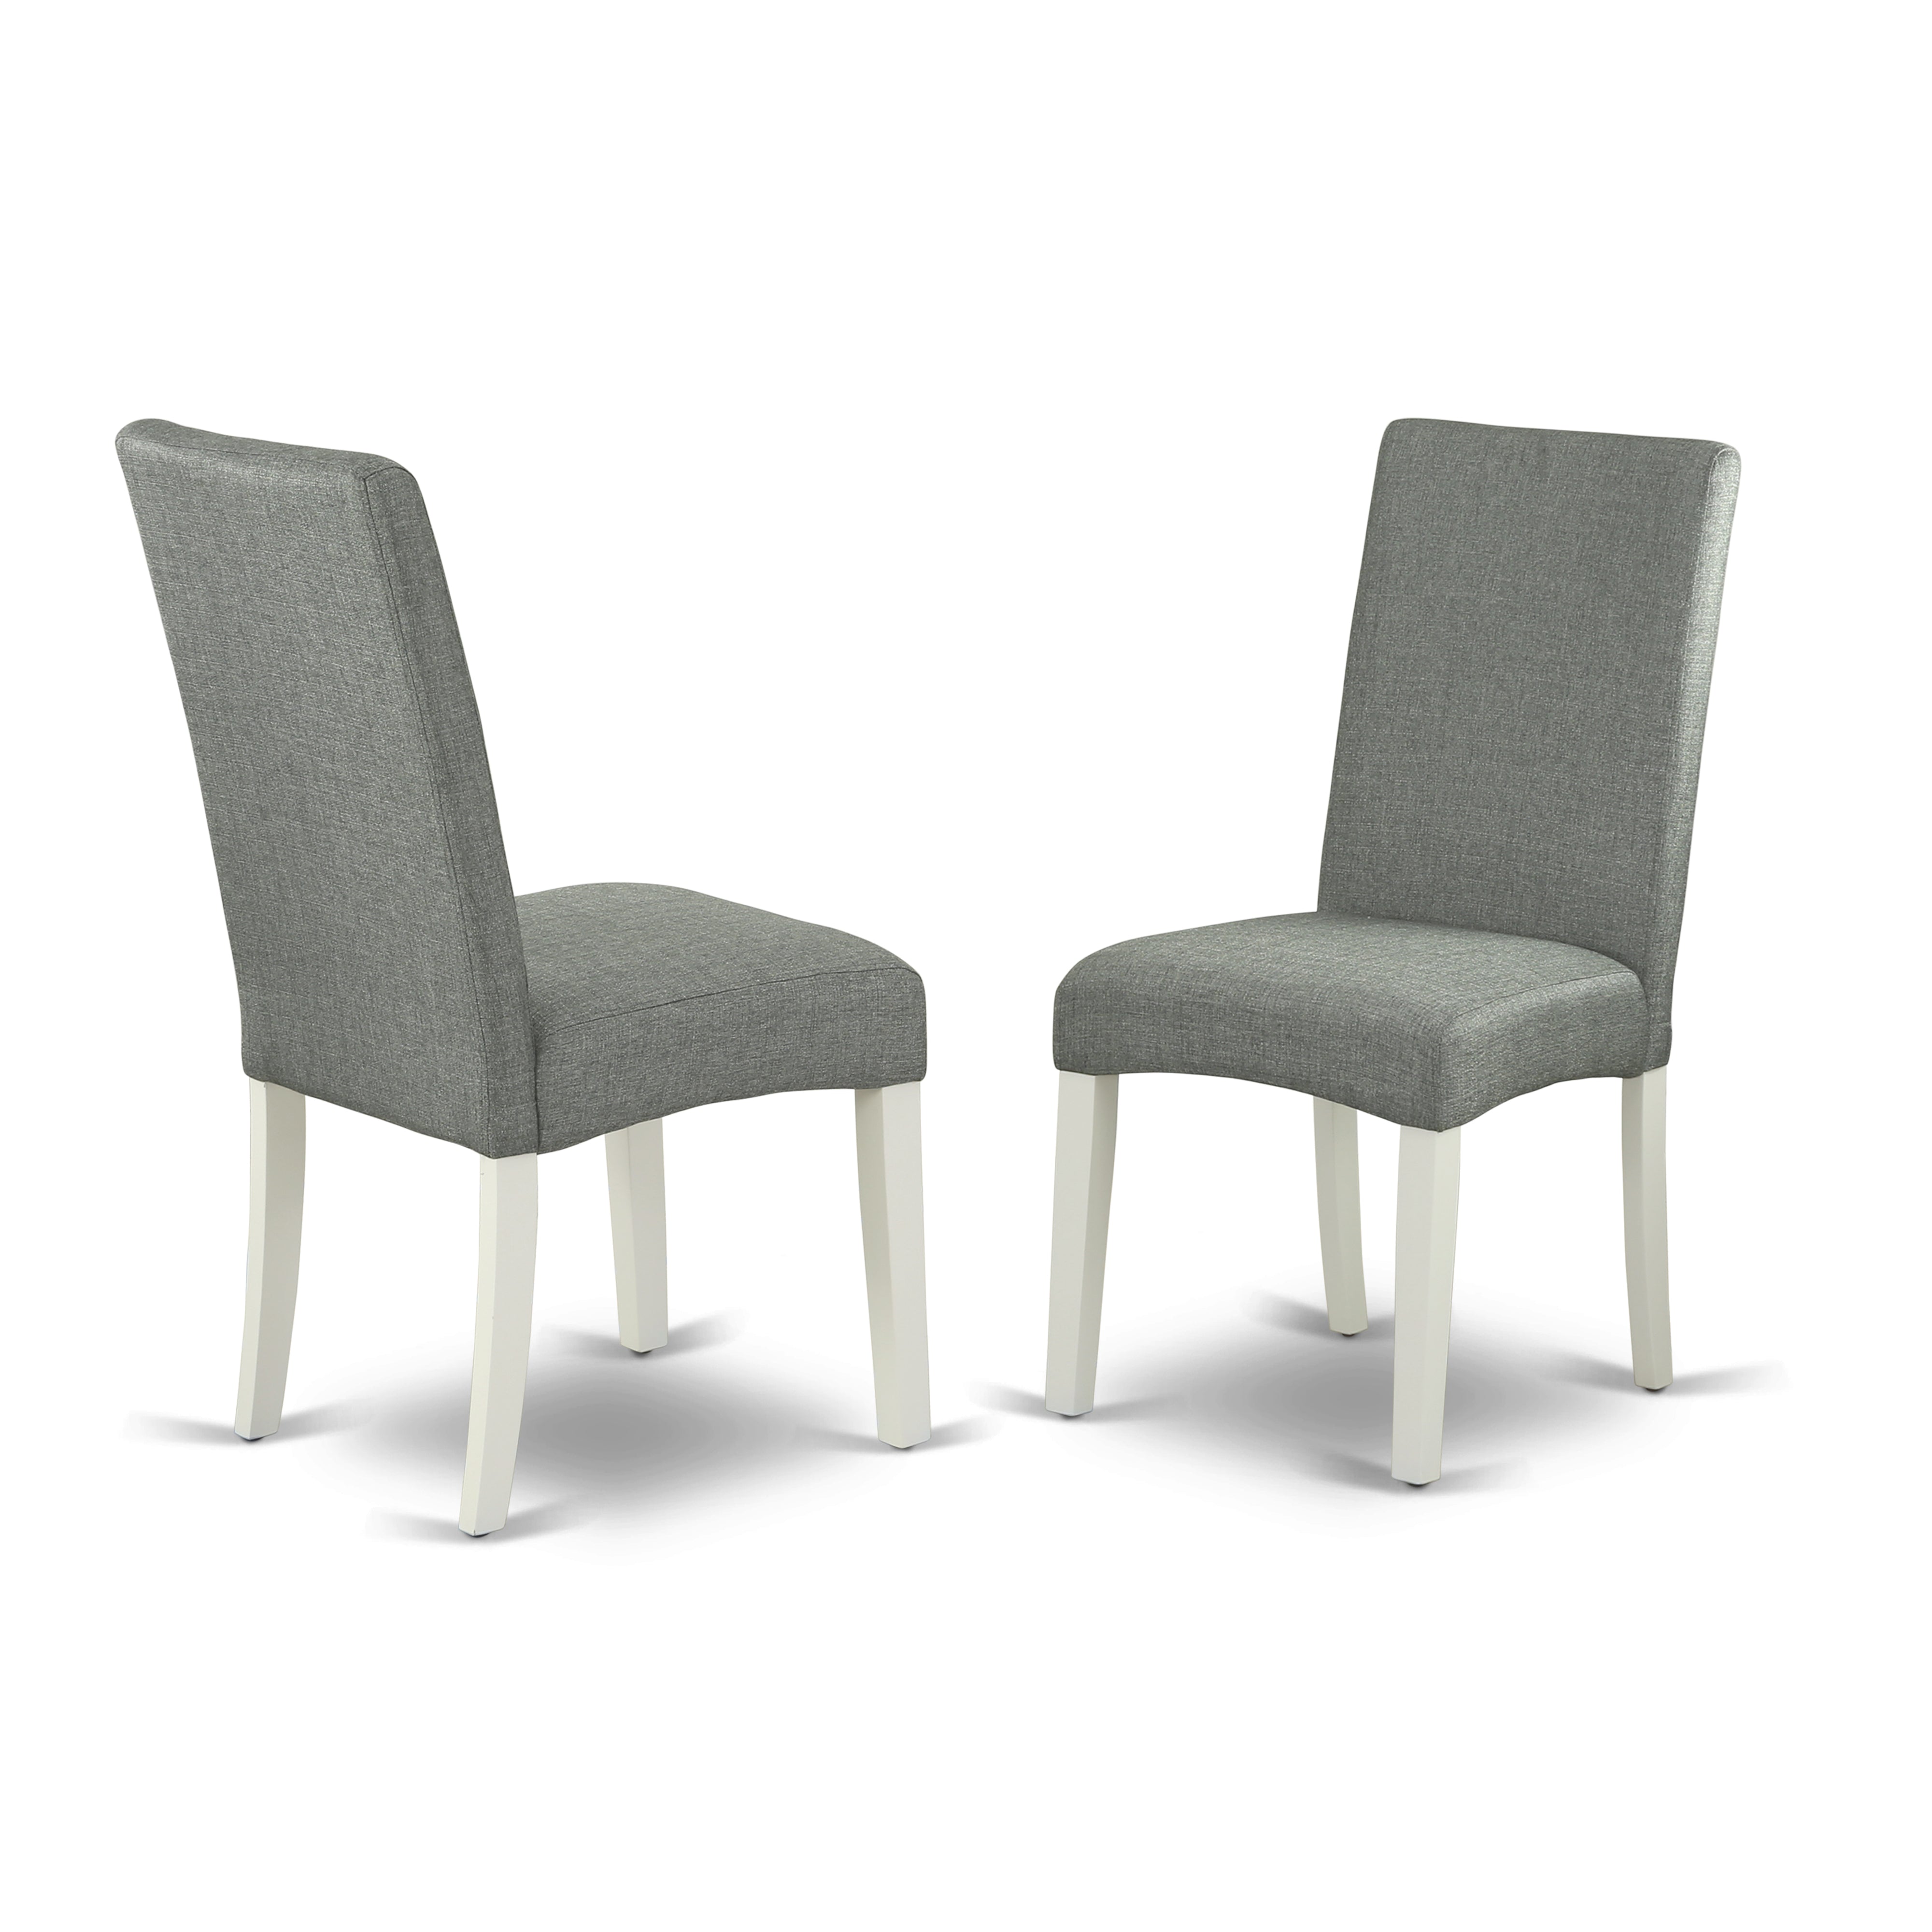 ANDR3-LWH-07 3Pc Round 36" Table And A Pair Of Parson Chair With Linen White Finish Leg And Linen Fabric- Gray Color